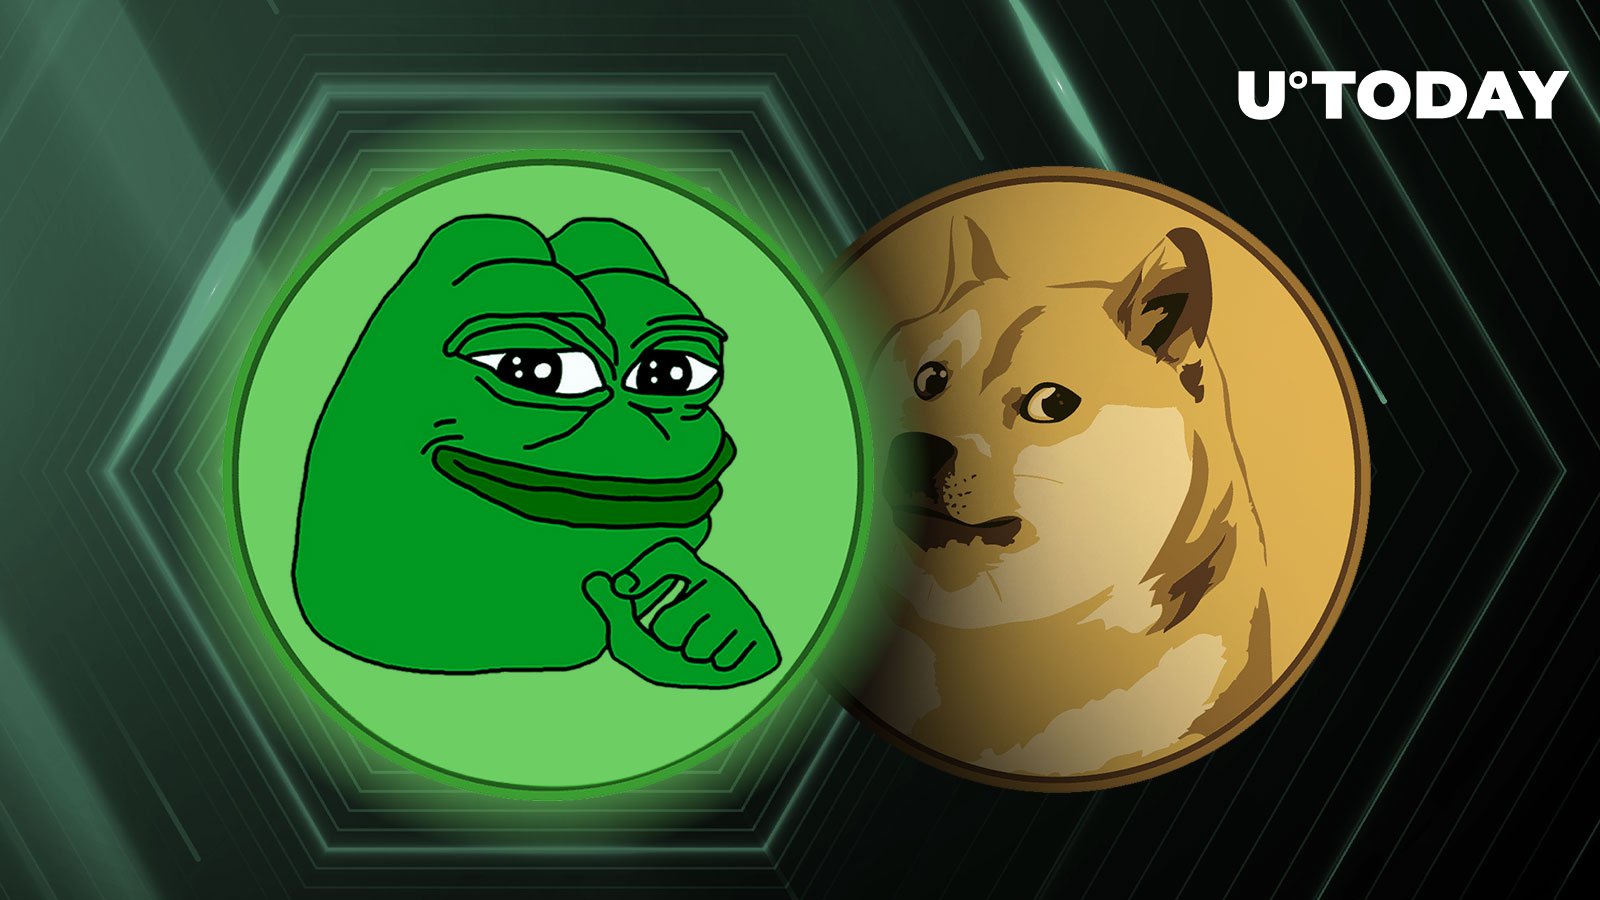 Pepe to Eclipse Dogecoin as Market Indicator, Analyst Says